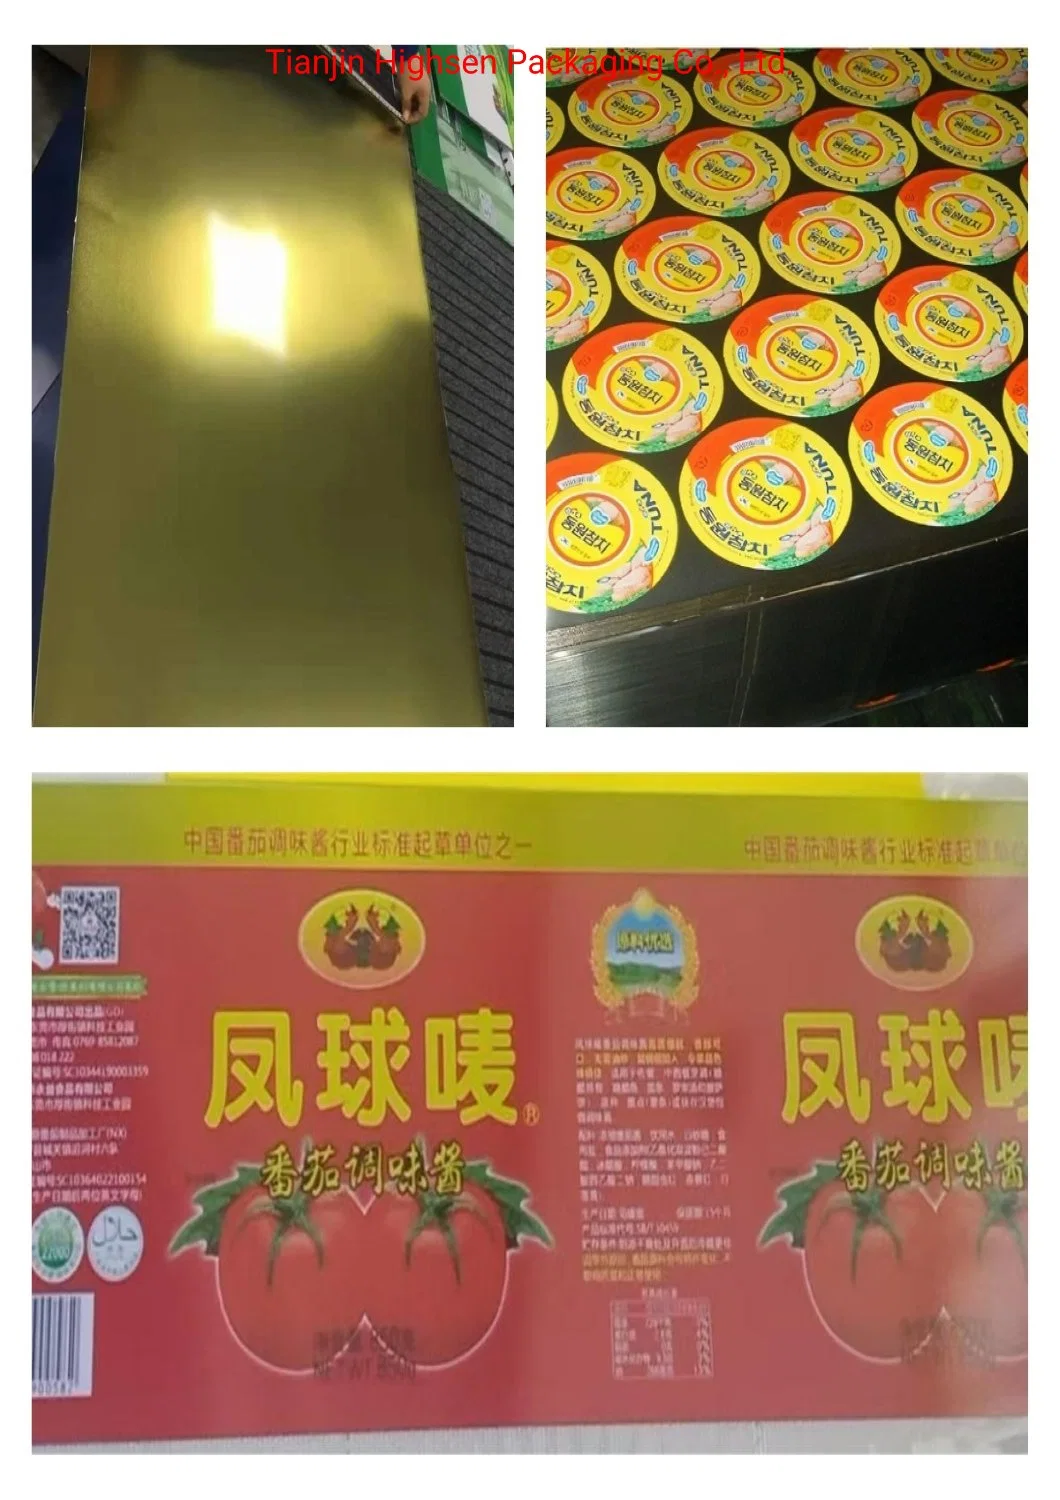 JIS G3303 Standard Metal Can Packaging Clear Lacquered and Printed Misprinted Tinplate